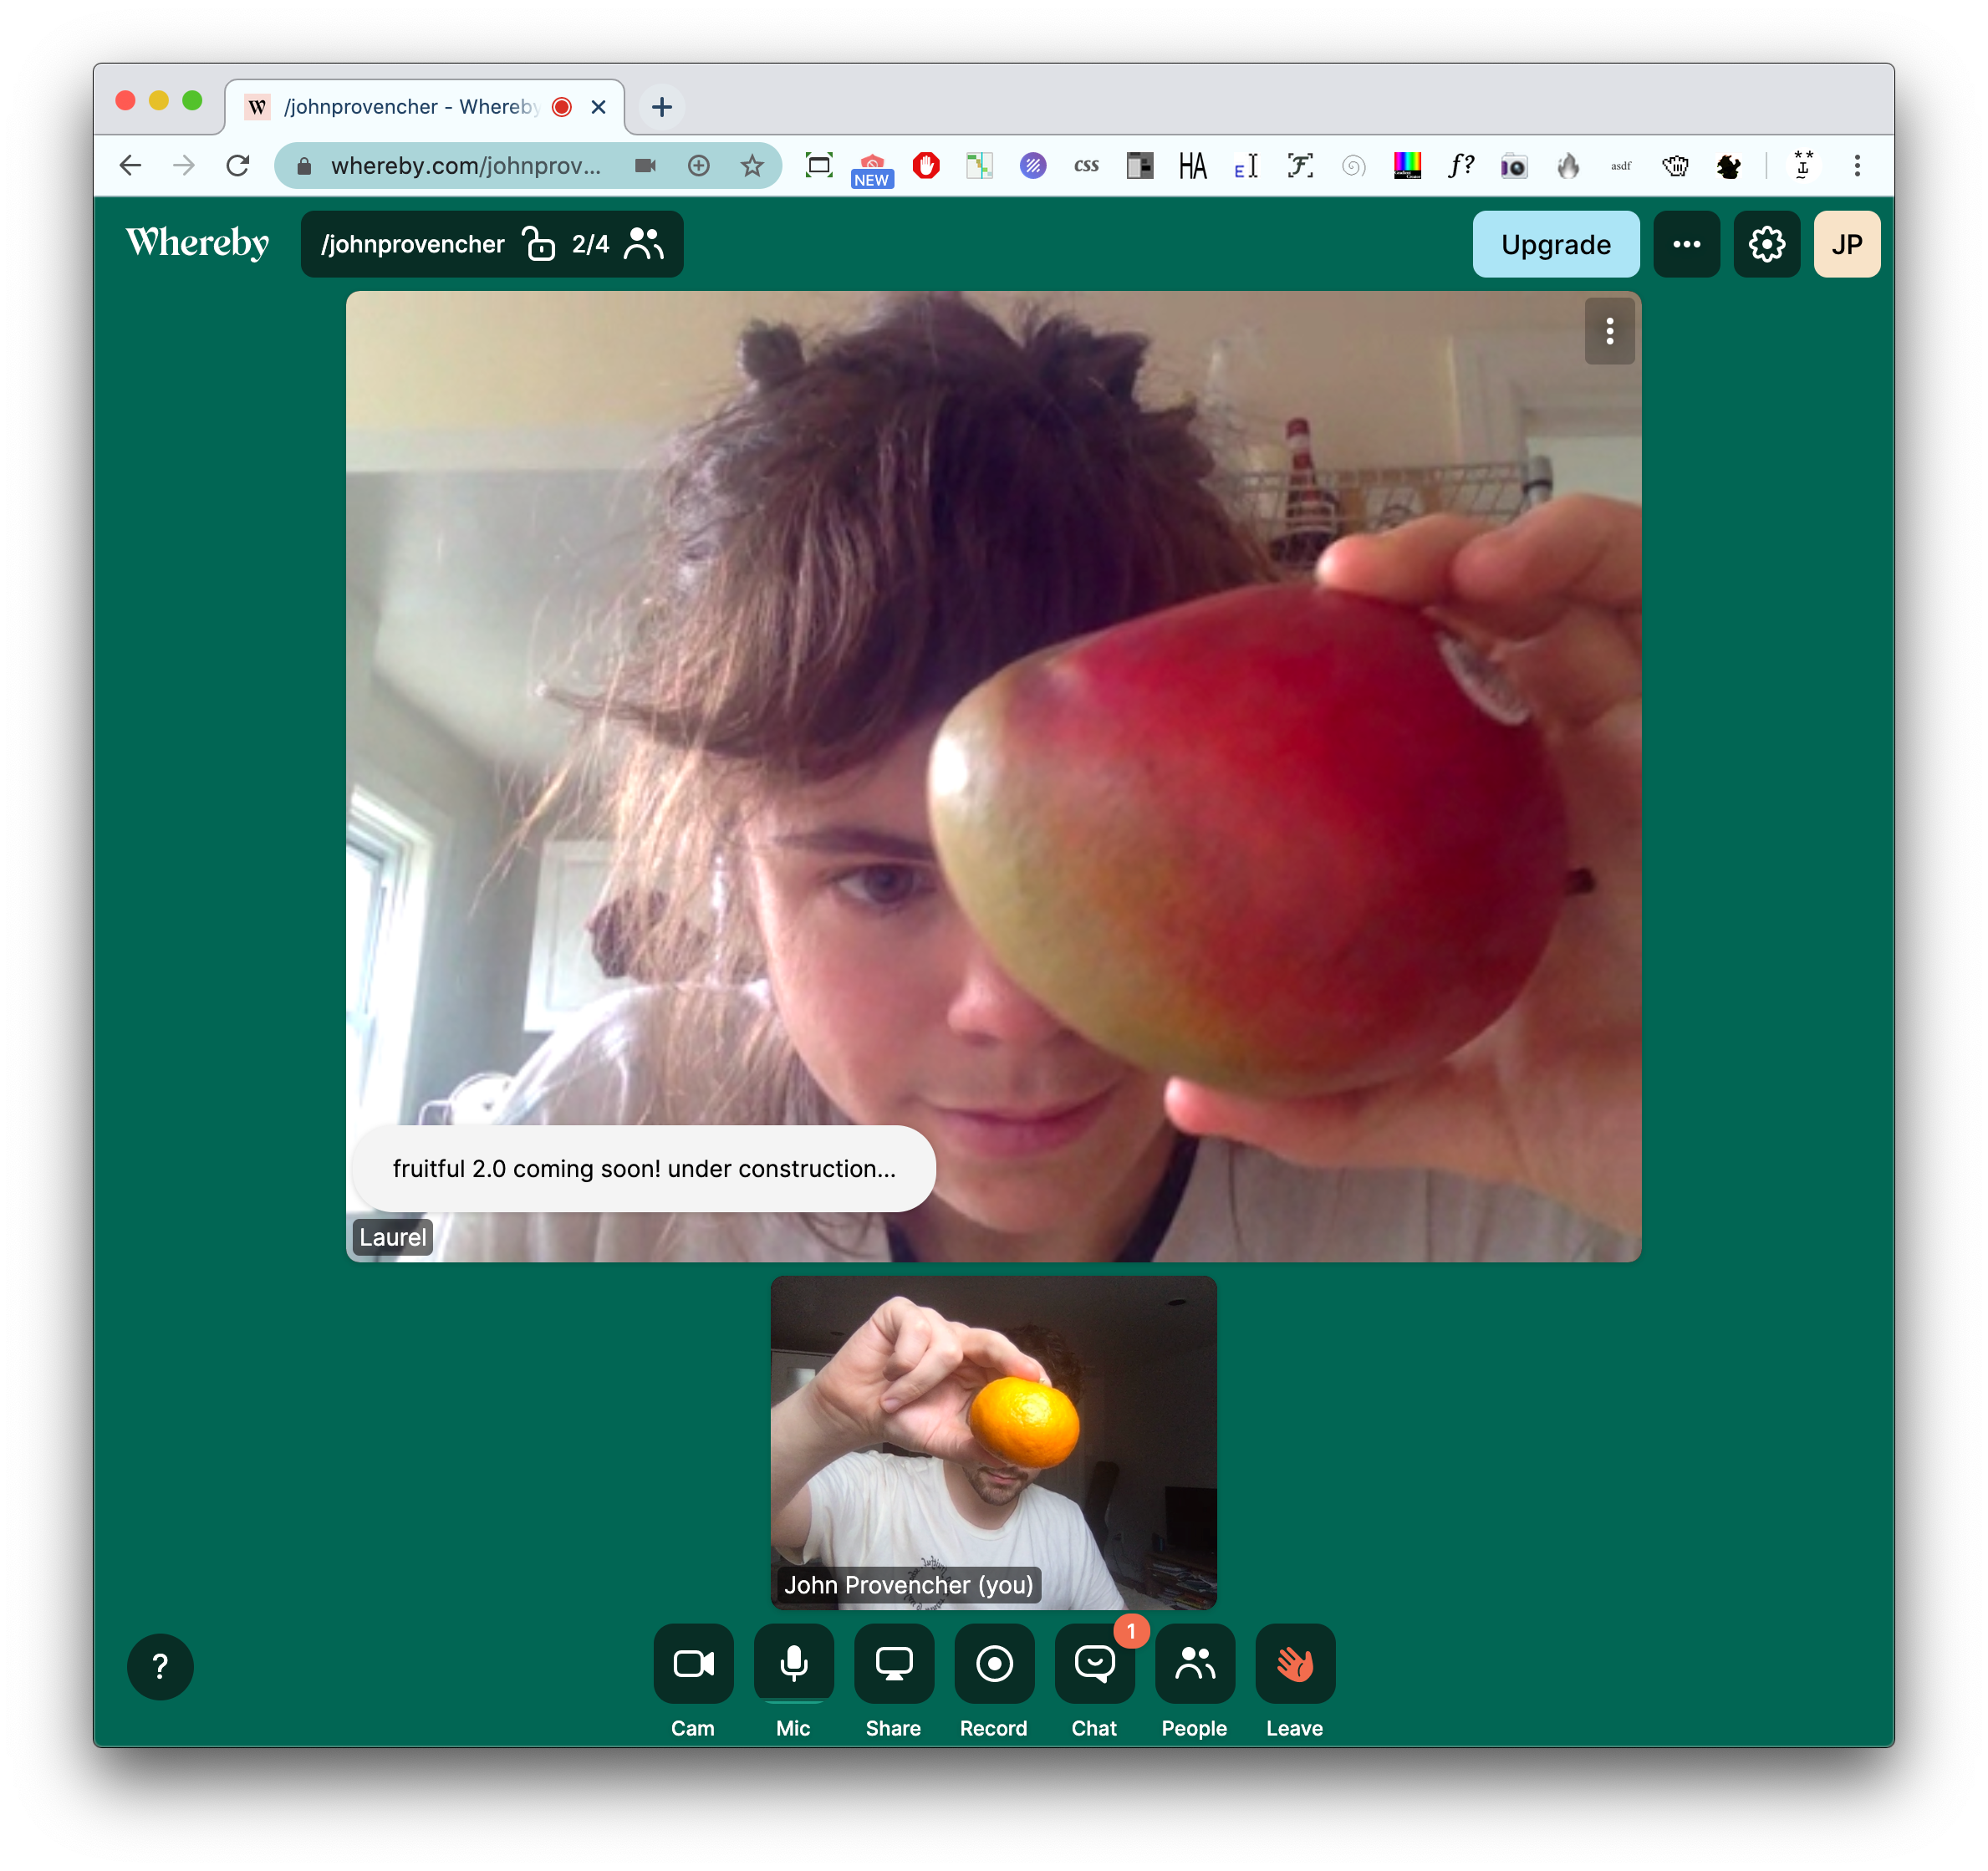 A screenshot of two people video chatting while holding fruits on the Whereby platform. Laurel appears in a larger frame than the other, and she presents a mango. John Provencher is in the smaller frame, and he covers his face with a clementine.